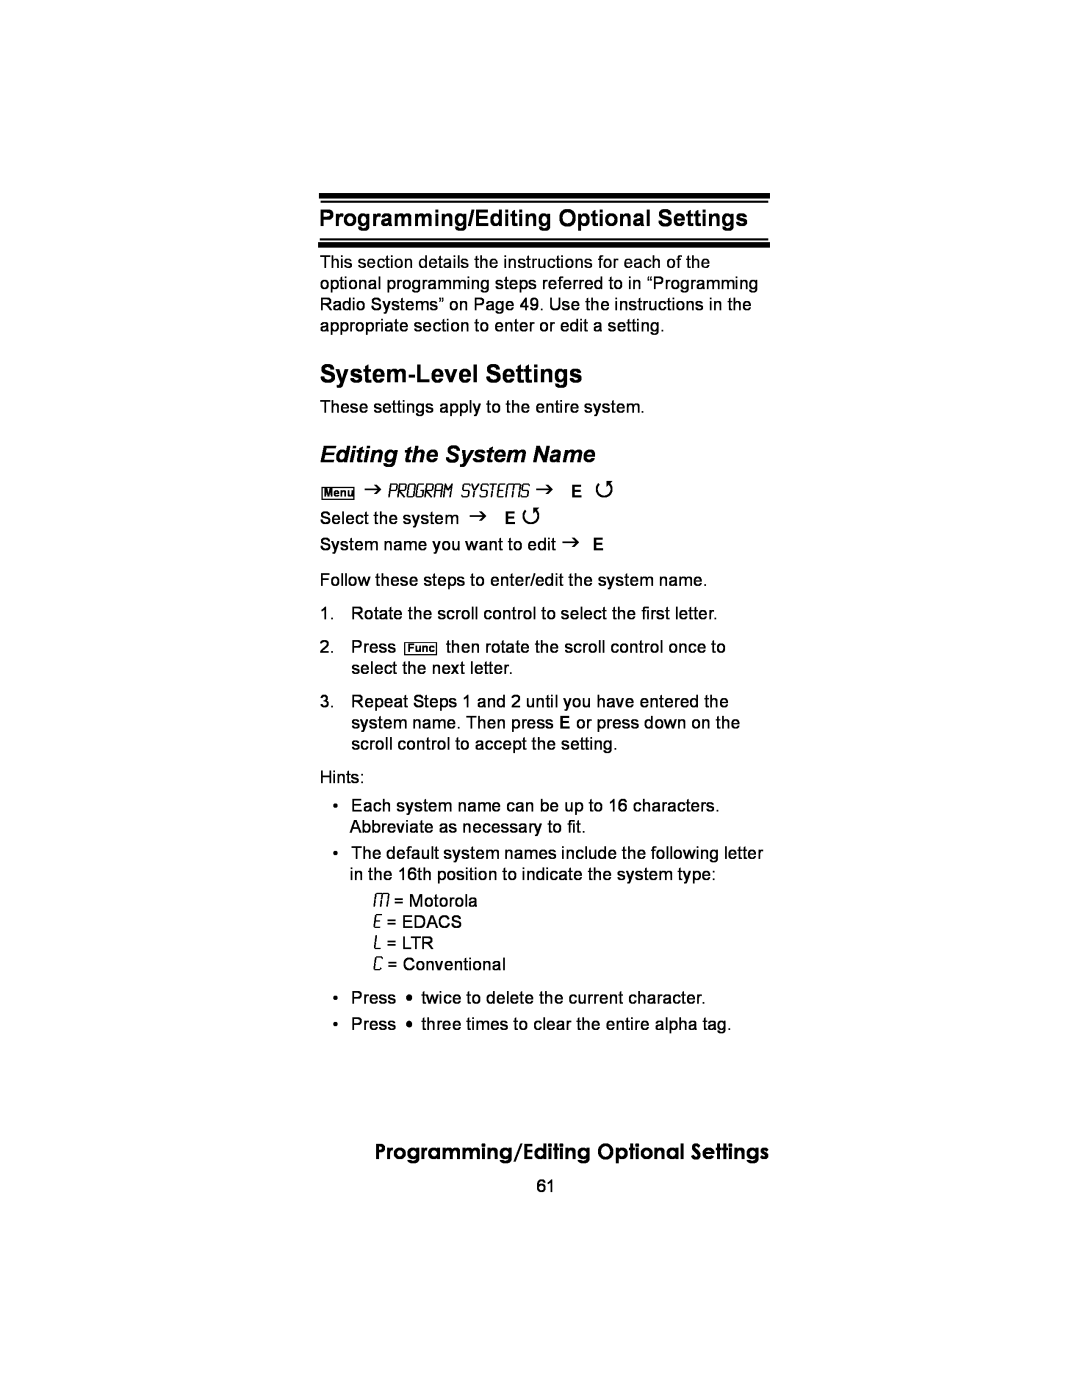 Uniden BC246T owner manual System-LevelSettings, Editing the System Name, Programming/Editing Optional Settings 